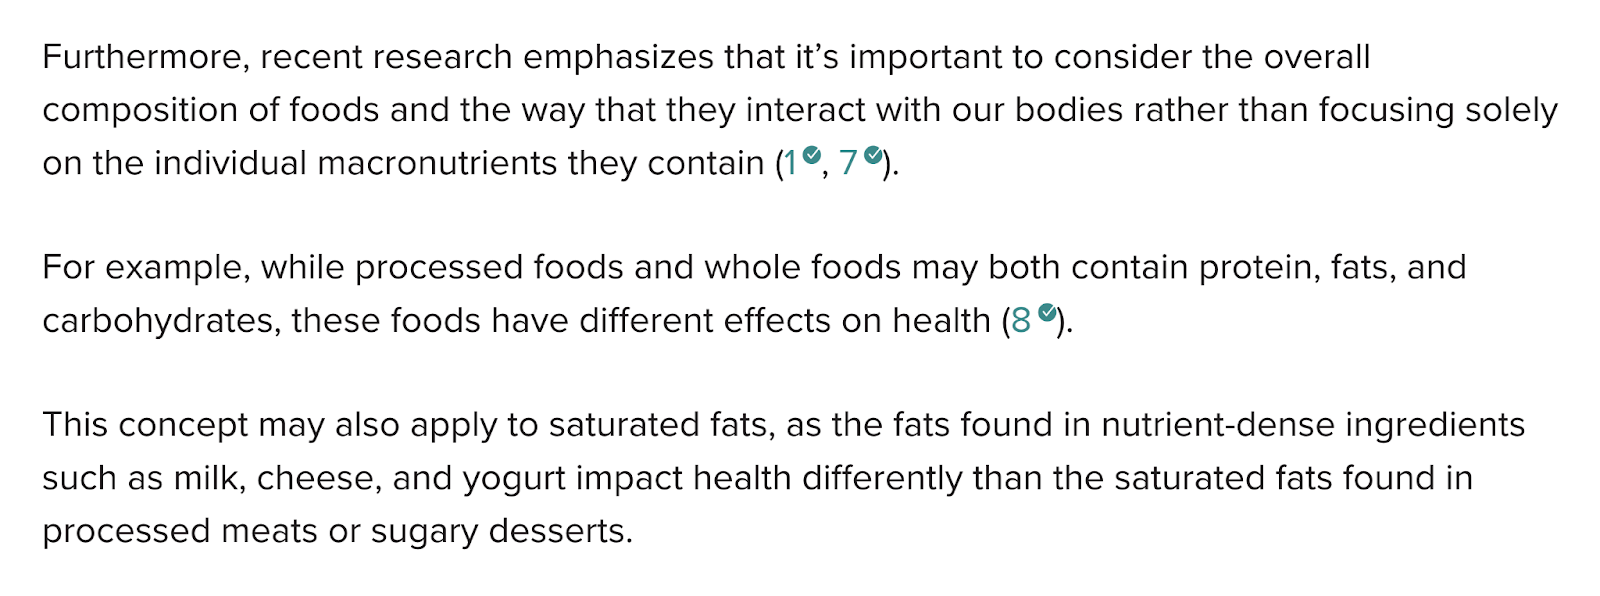 Healthline's article concludes that the overall composition of foods is more important than individual nutrients like saturated fat